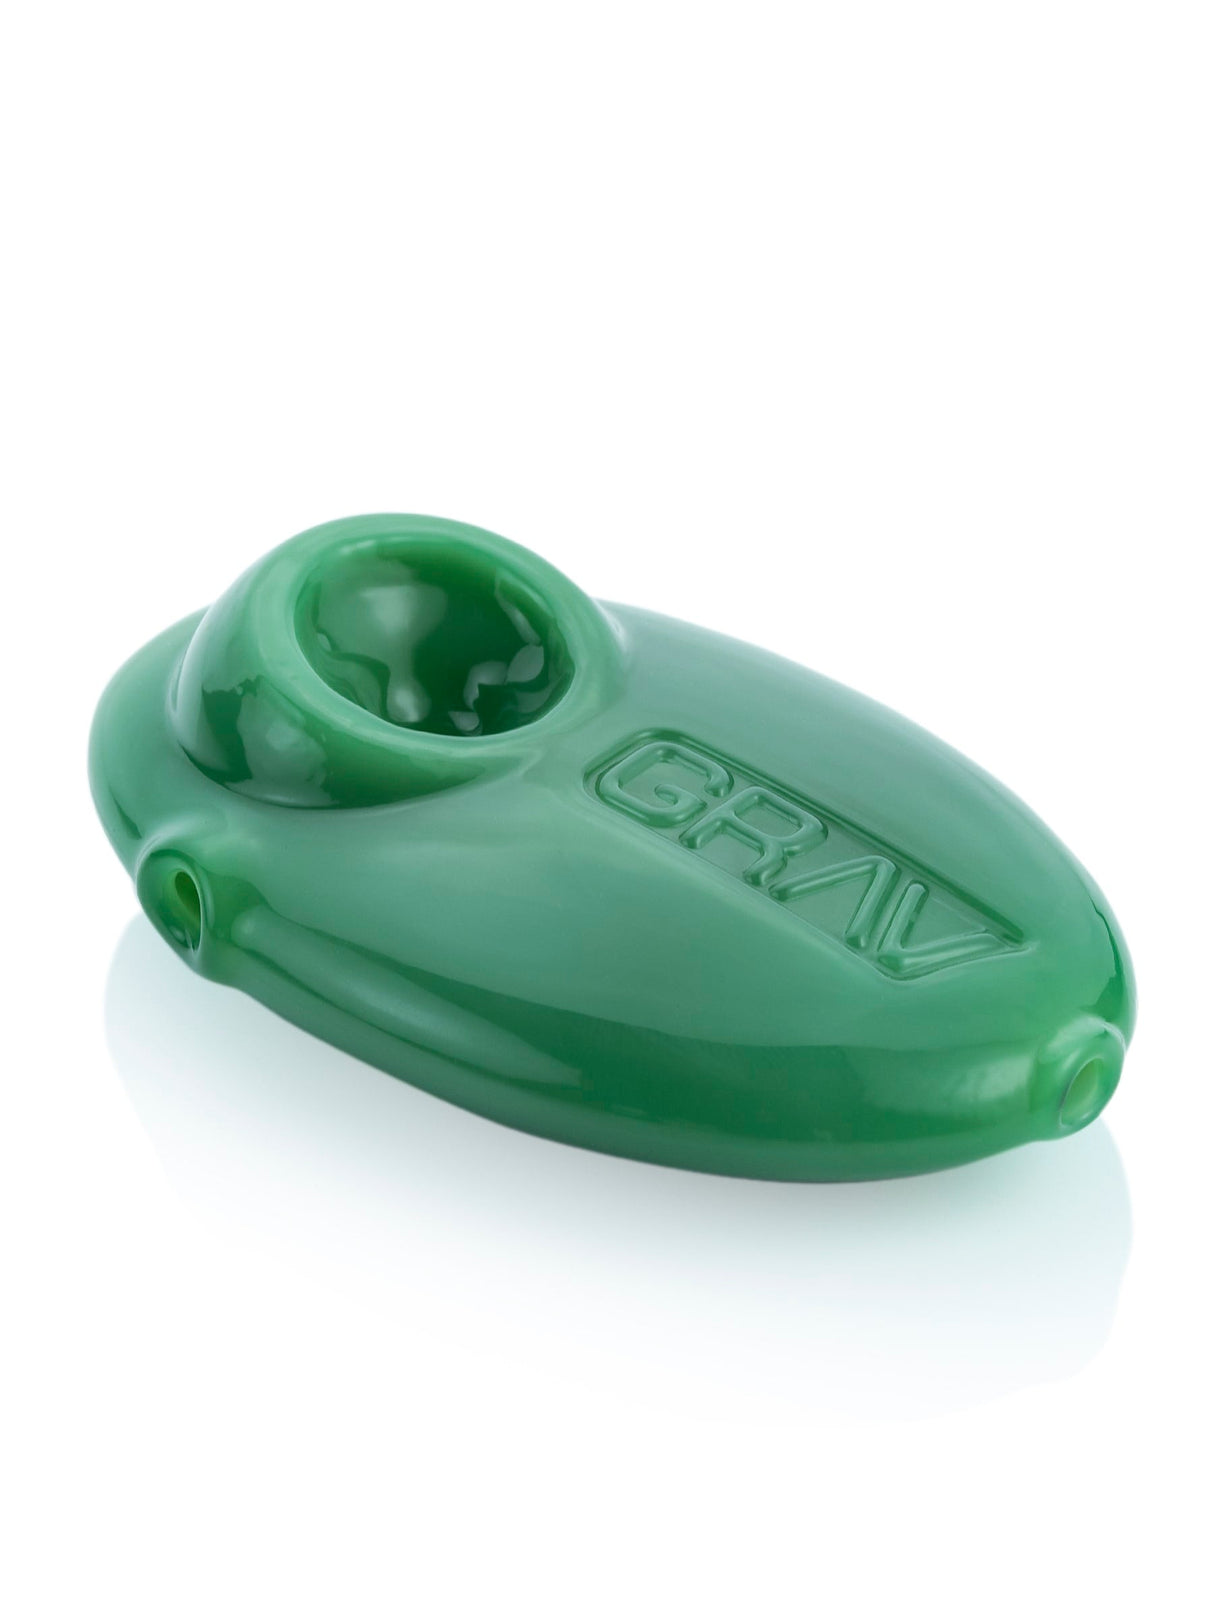 GRAV Pebble Spoon in Green, Compact Borosilicate Glass Hand Pipe, 3" Size, Side View